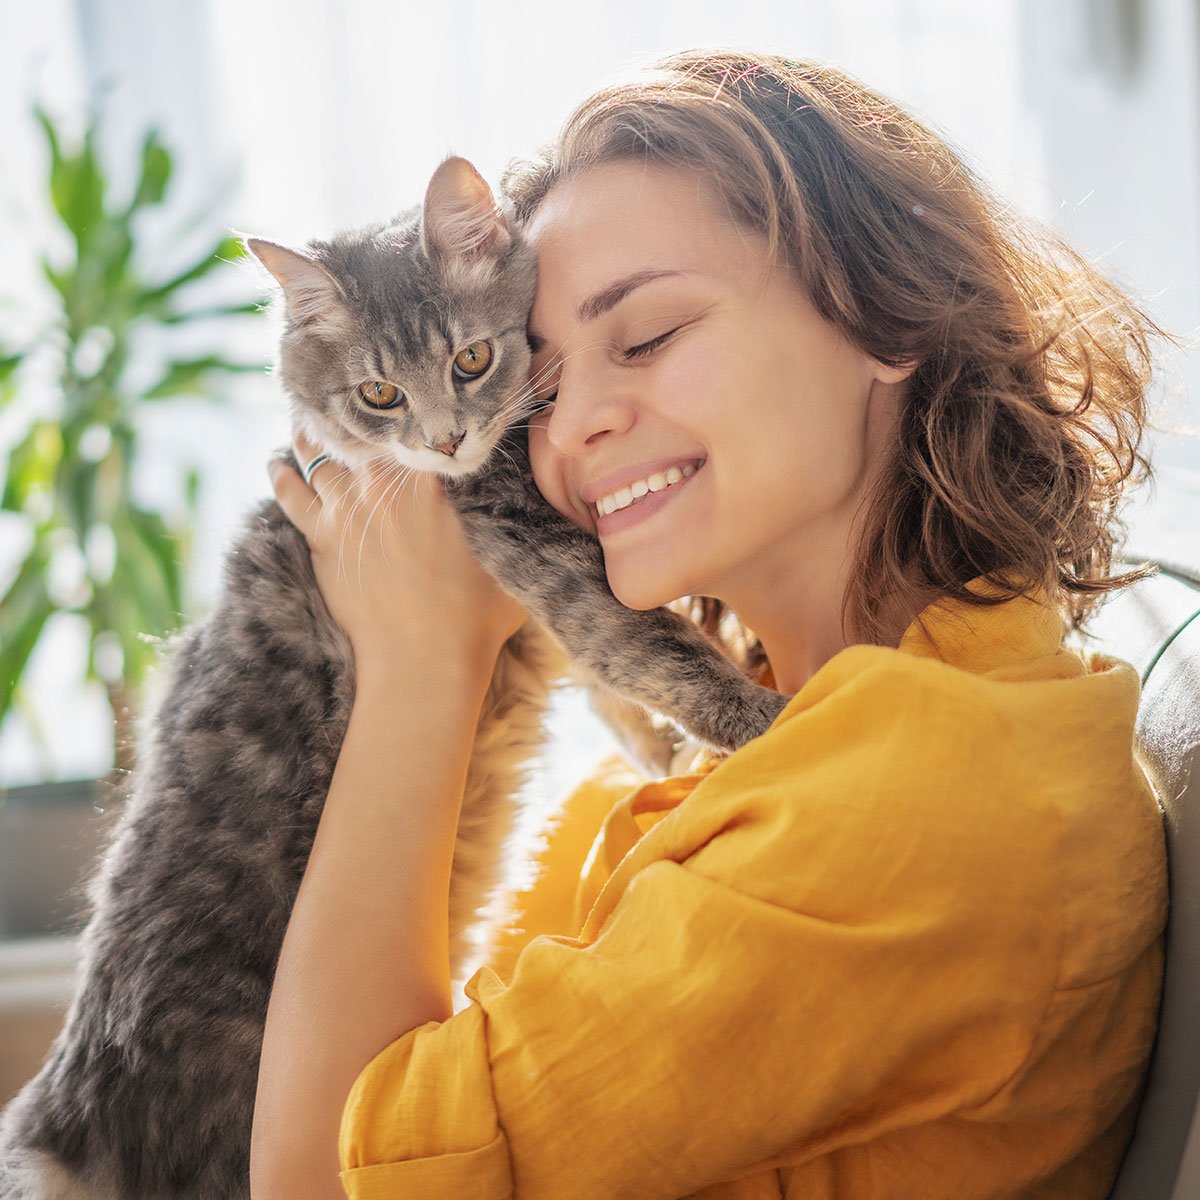 A smiling woman in a yellow shirt is holding a cat in her arms